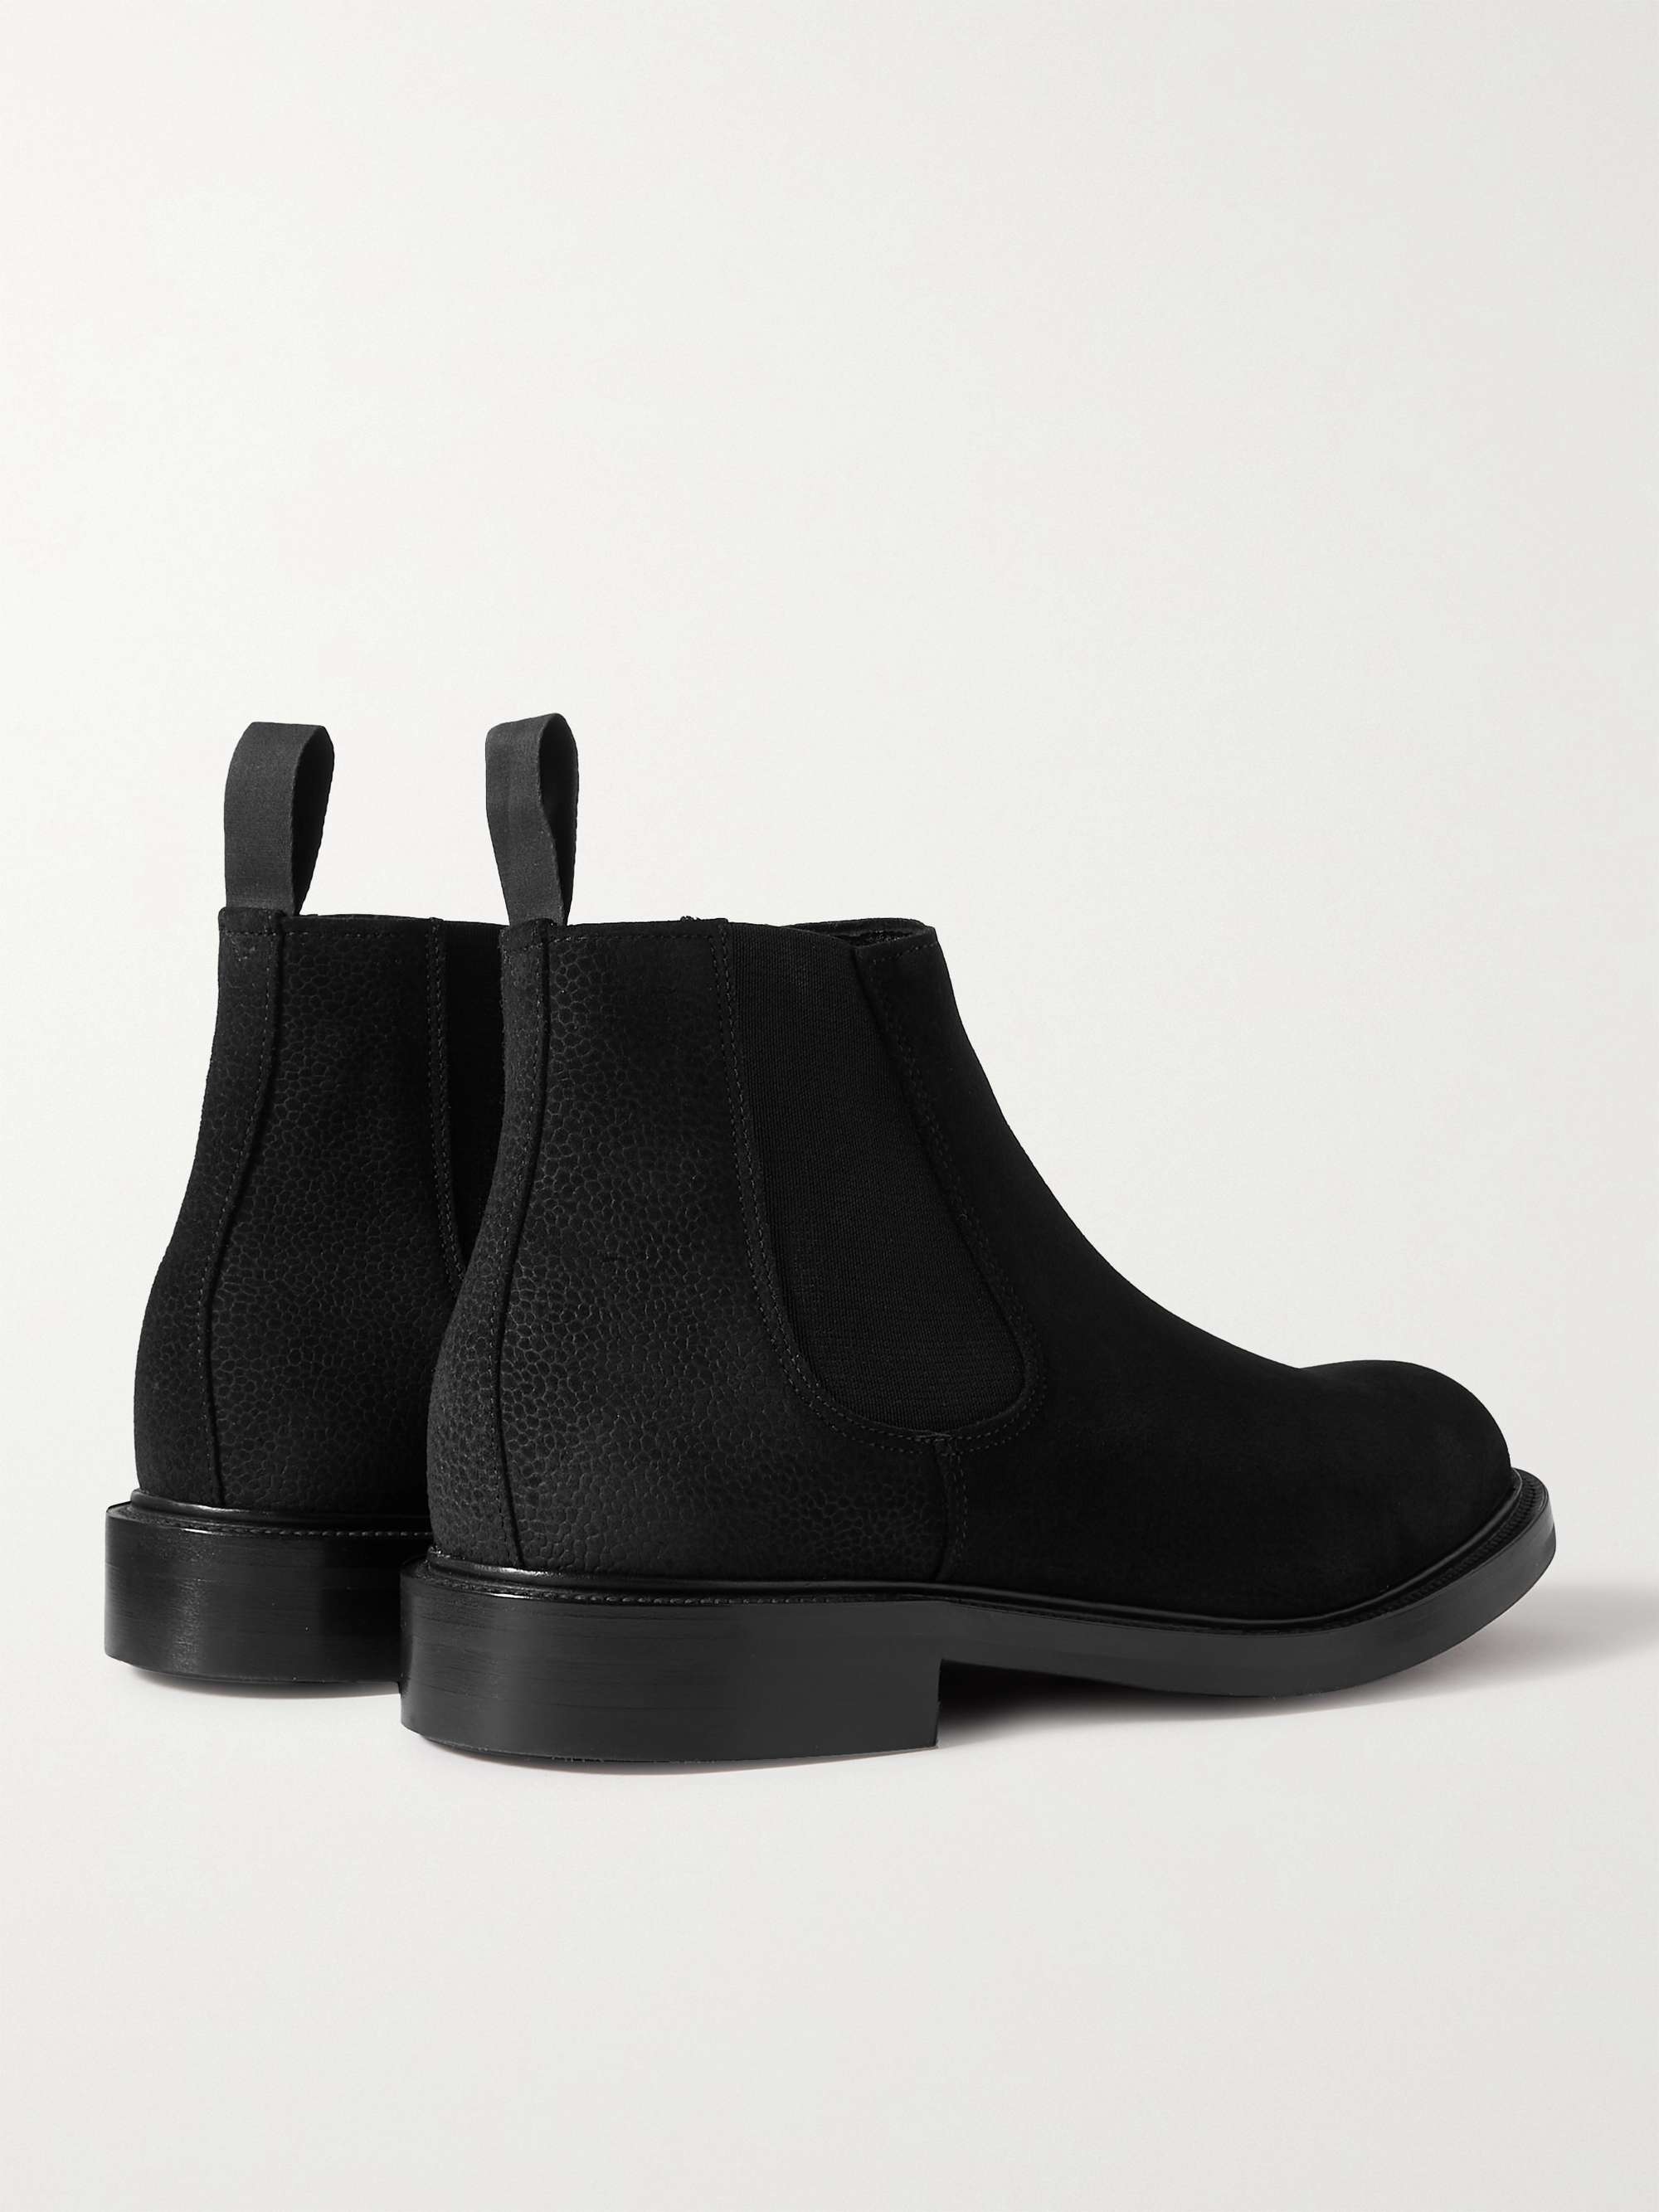 GEORGE CLEVERLEY Jason Full-Grain Suede Chelsea Boots for Men | MR PORTER